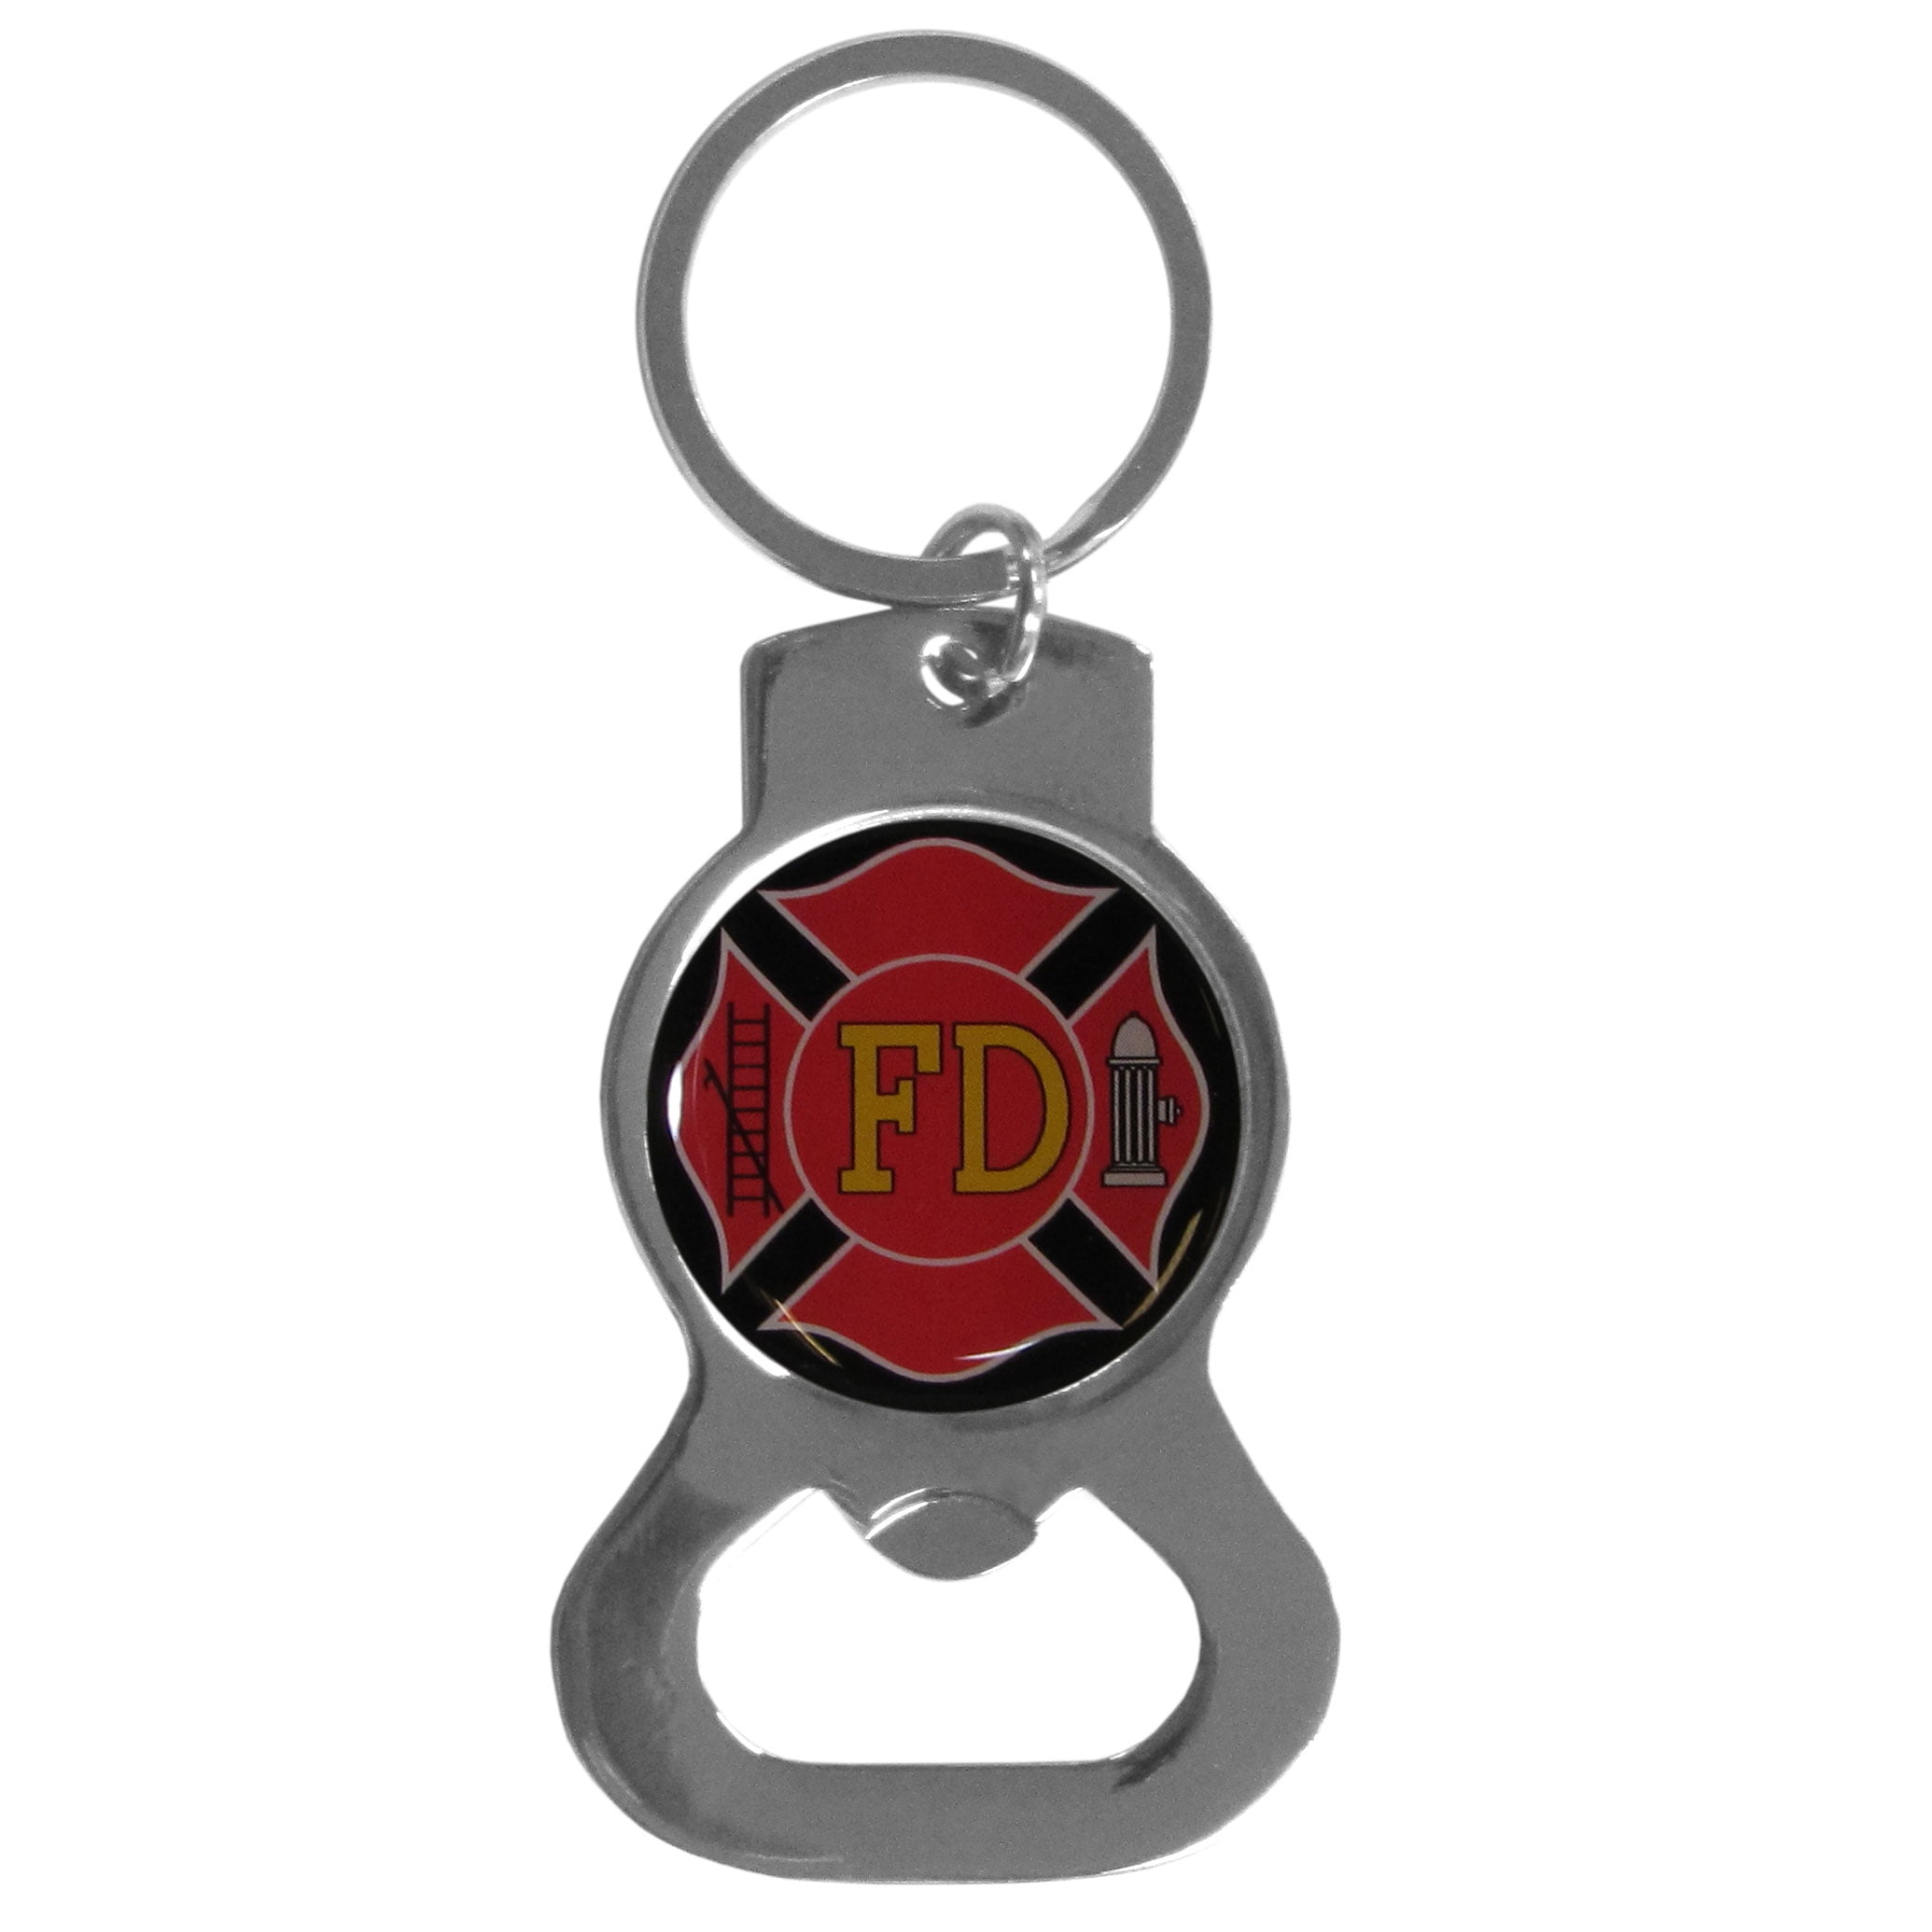 THE ROCKY HORROR PICTURE SHOW KEYCHAIN DOUBLE SIDED ACRYLIC KEYRING 